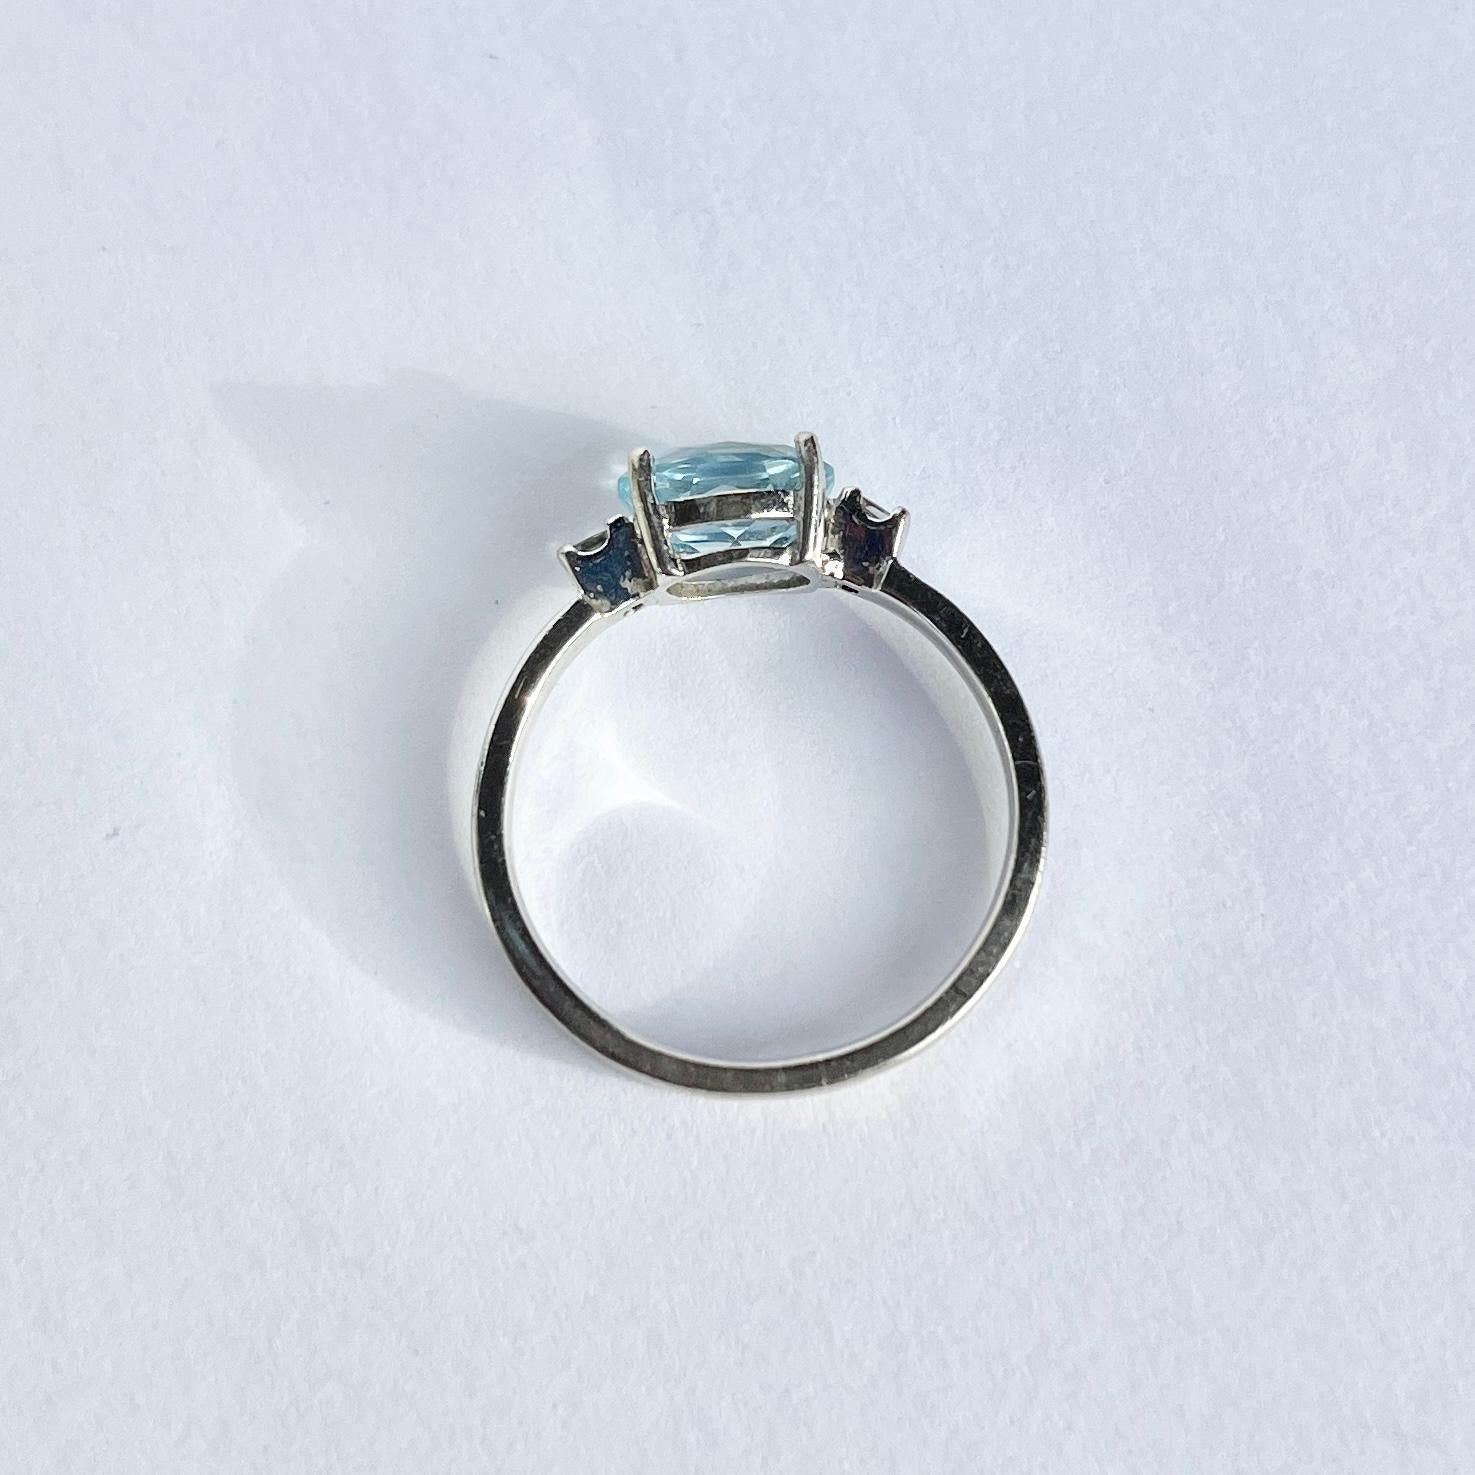 Vintage Aqua and 18 Carat White Gold Solitaire Ring In Good Condition For Sale In Chipping Campden, GB